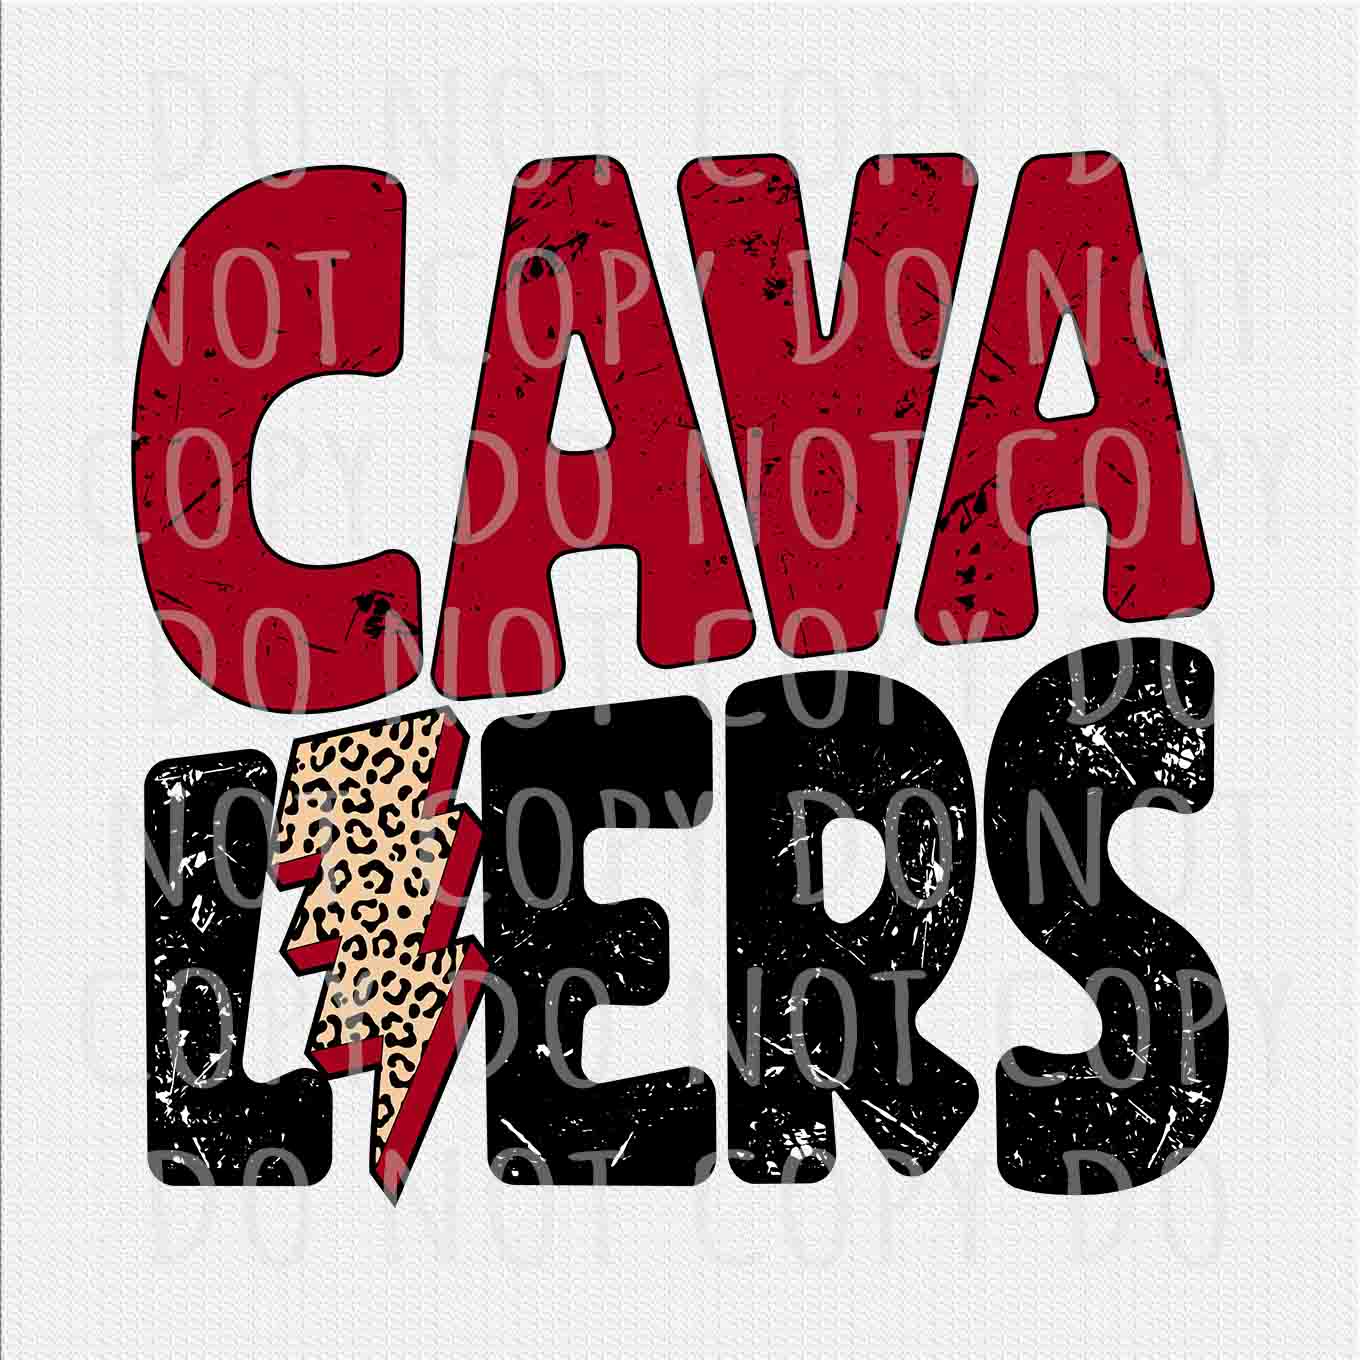 Cavaliers png, Cavaliers Red Black Distressed Lightning Bolt png, Cavaliers High School, Digital download, PNG 300 DPI